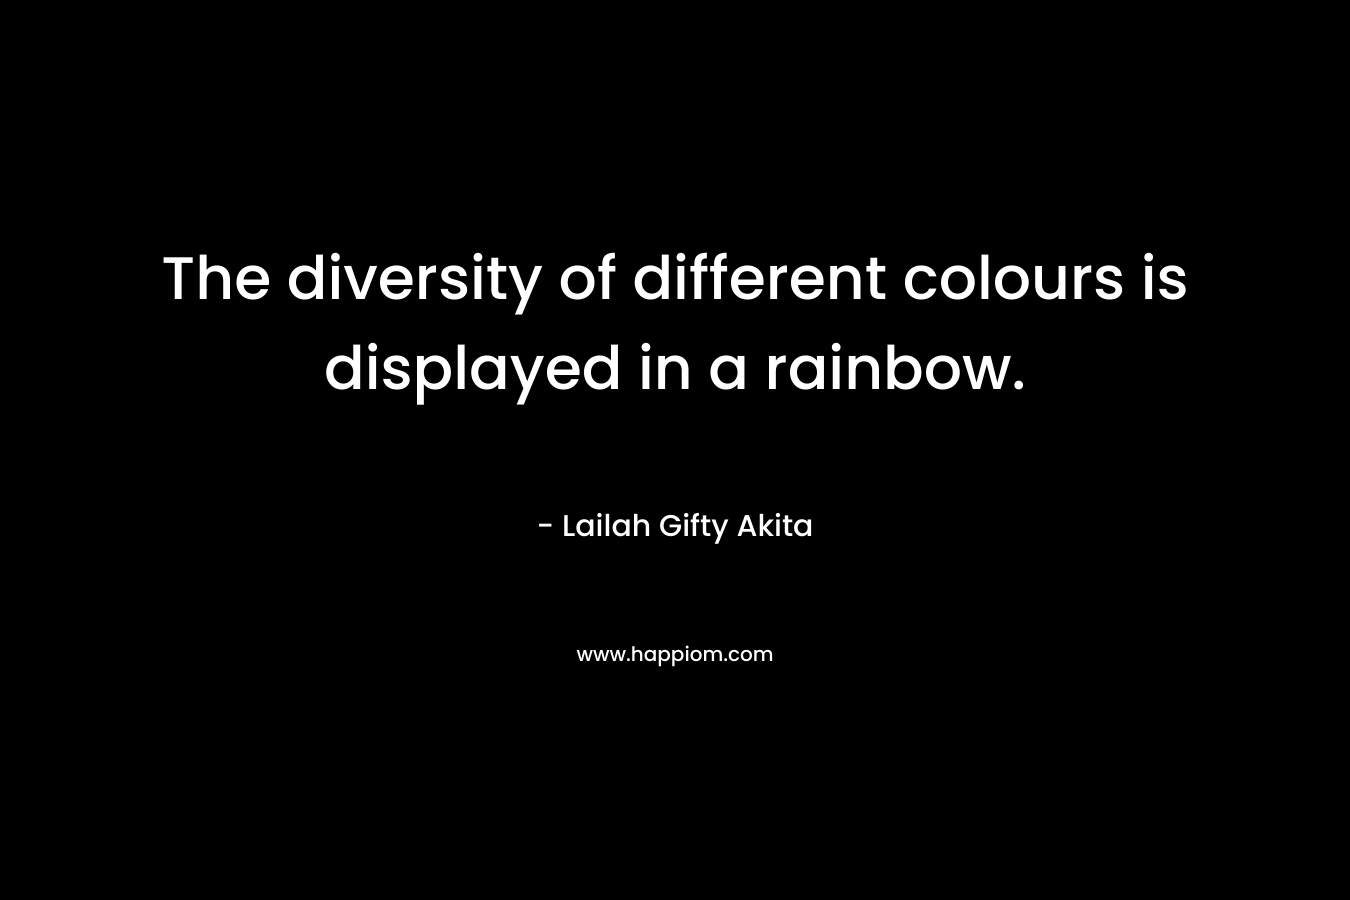 The diversity of different colours is displayed in a rainbow. – Lailah Gifty Akita